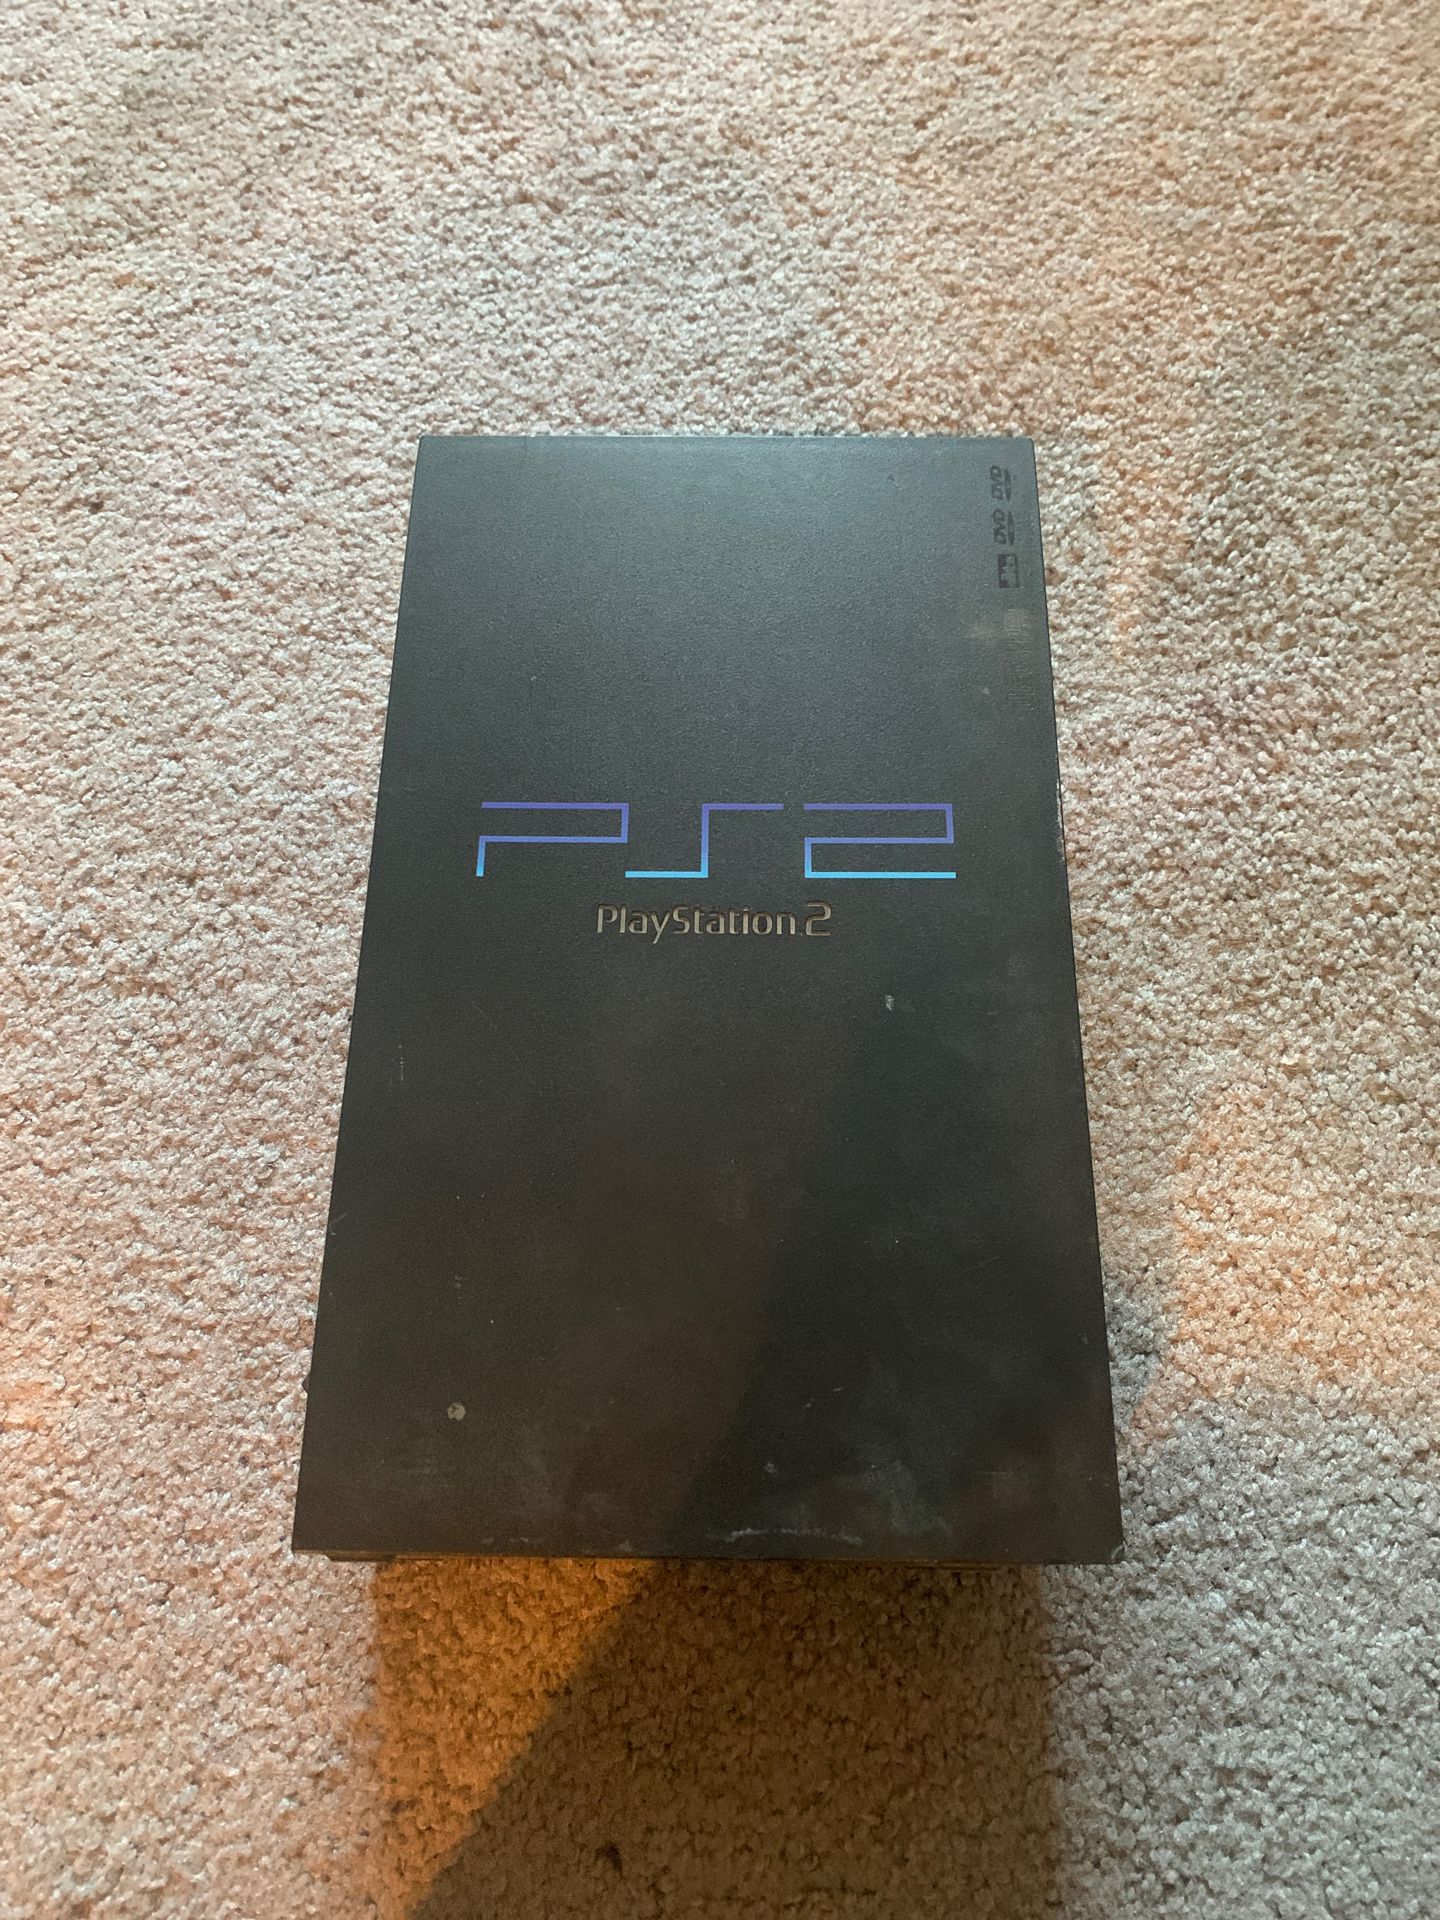 PS2 console